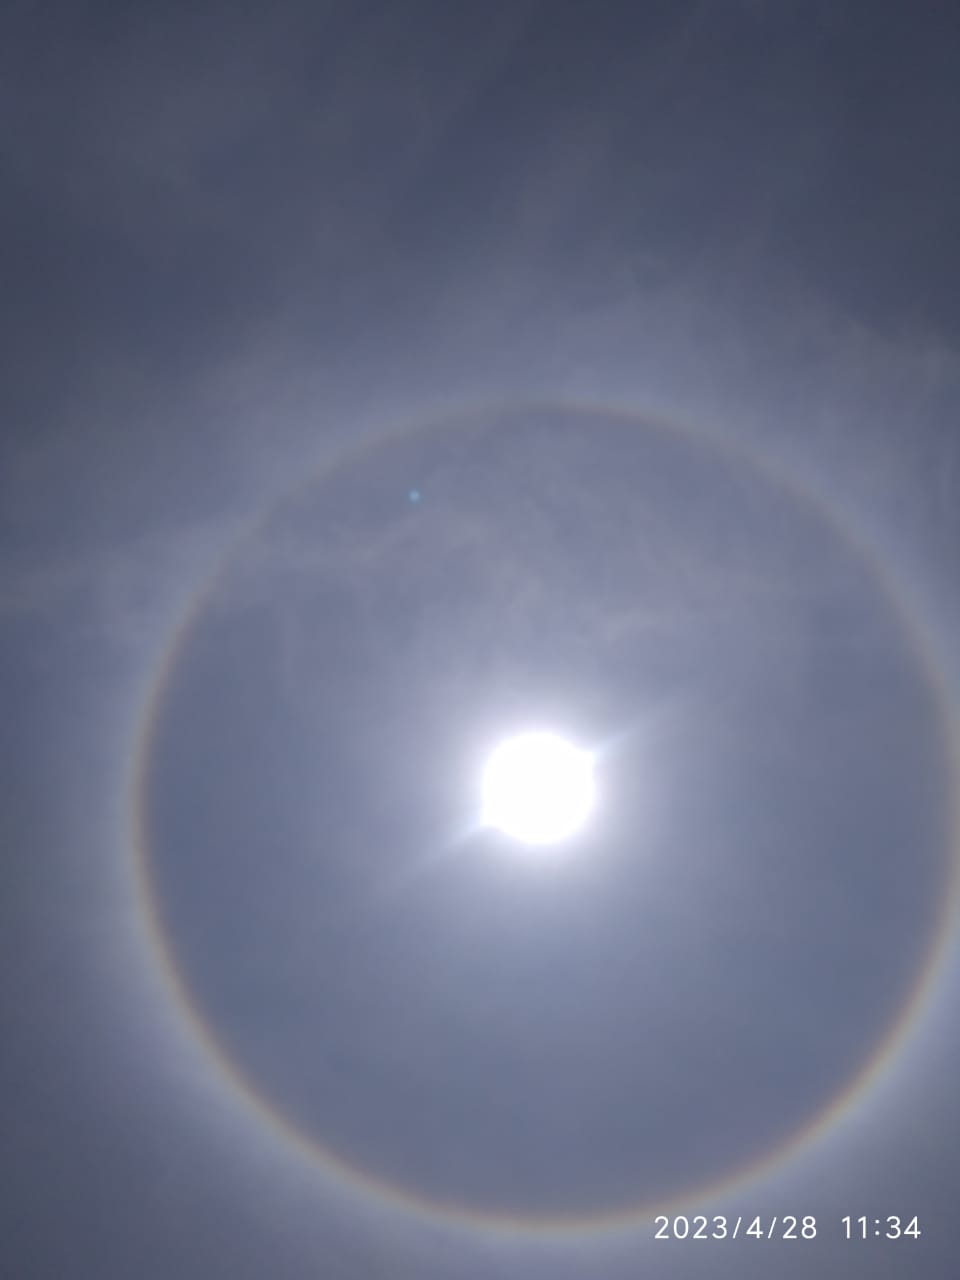 US National Weather Service Sacramento California - There's a ring around  the Sun this morning! This is known as a 22 degree halo, an optical effect  caused by refraction of sunlight through